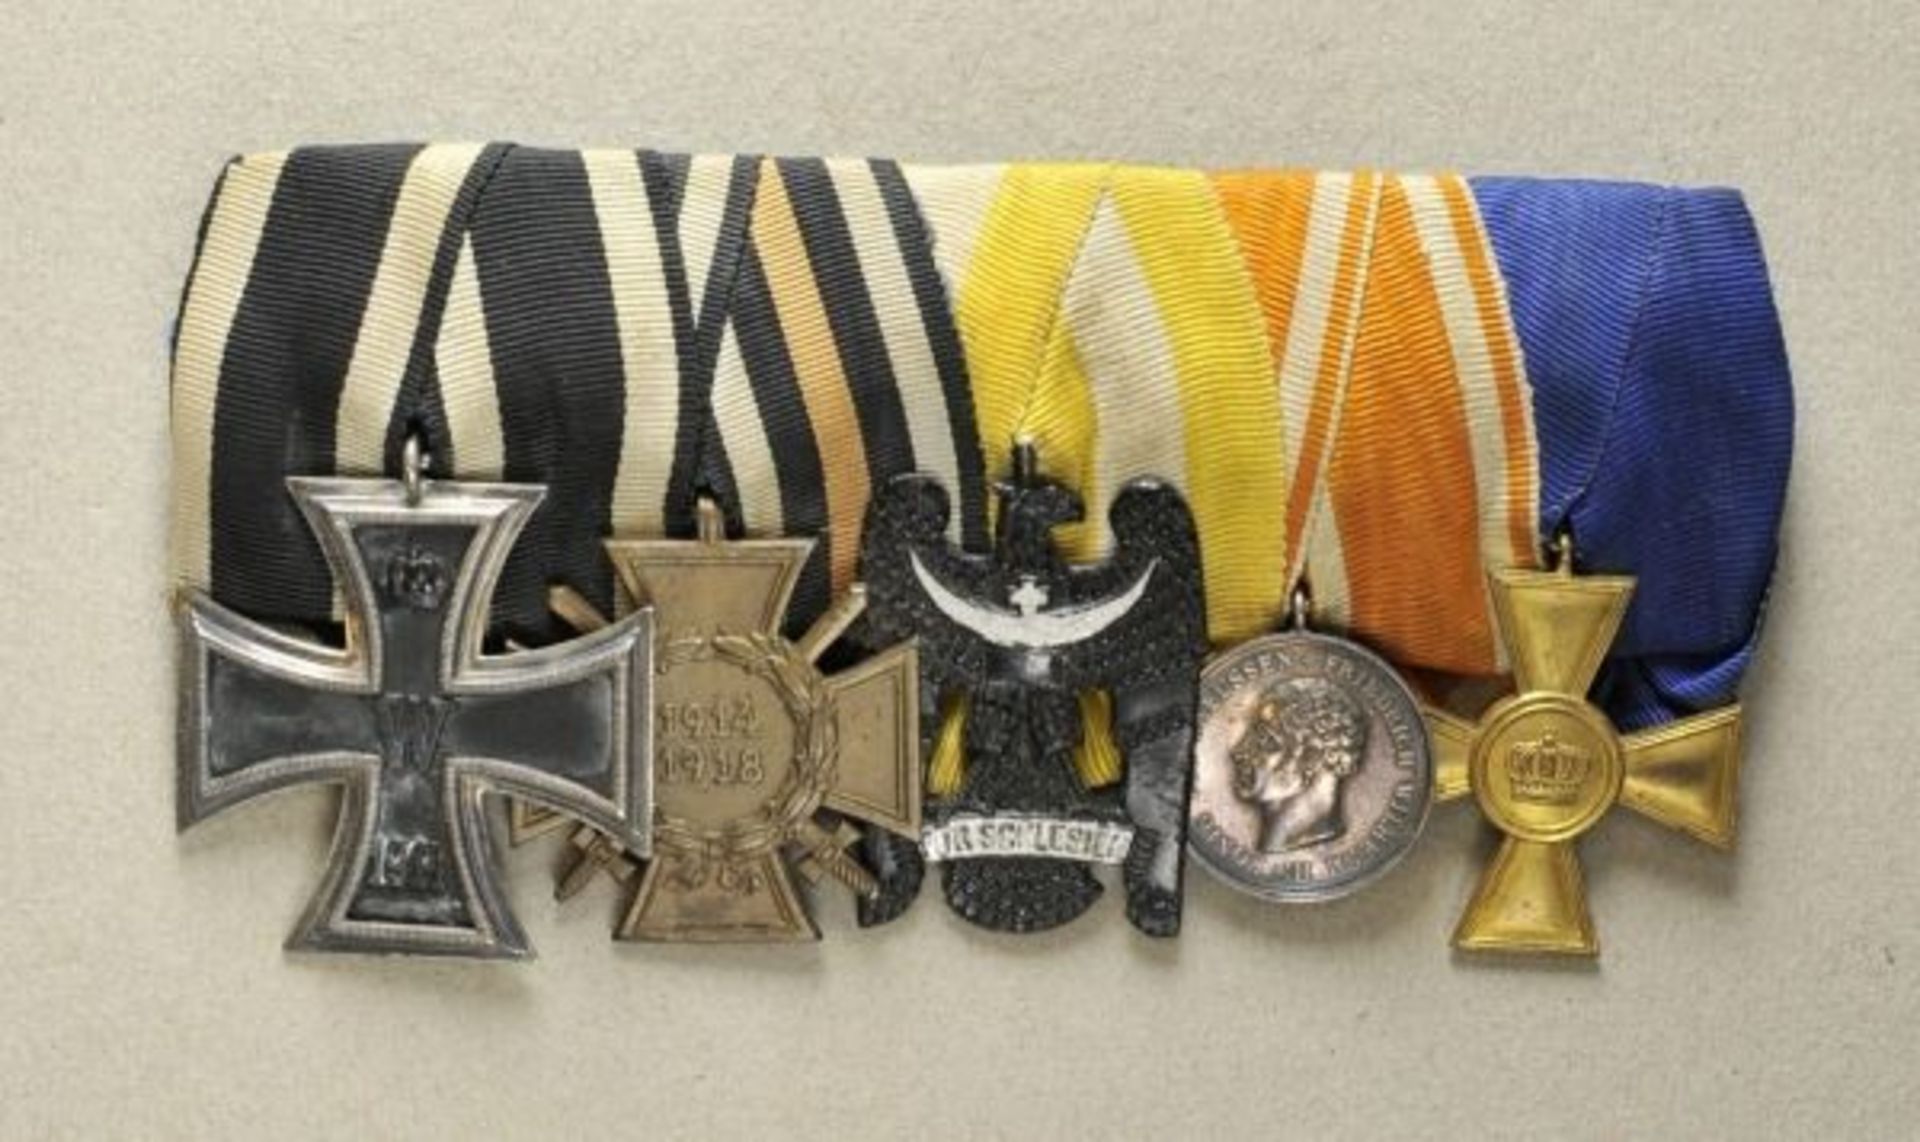 Opening: 100 EUR    0.1.) Collection Rick Lundström  Freikoprs: Large mounted medalbar of a